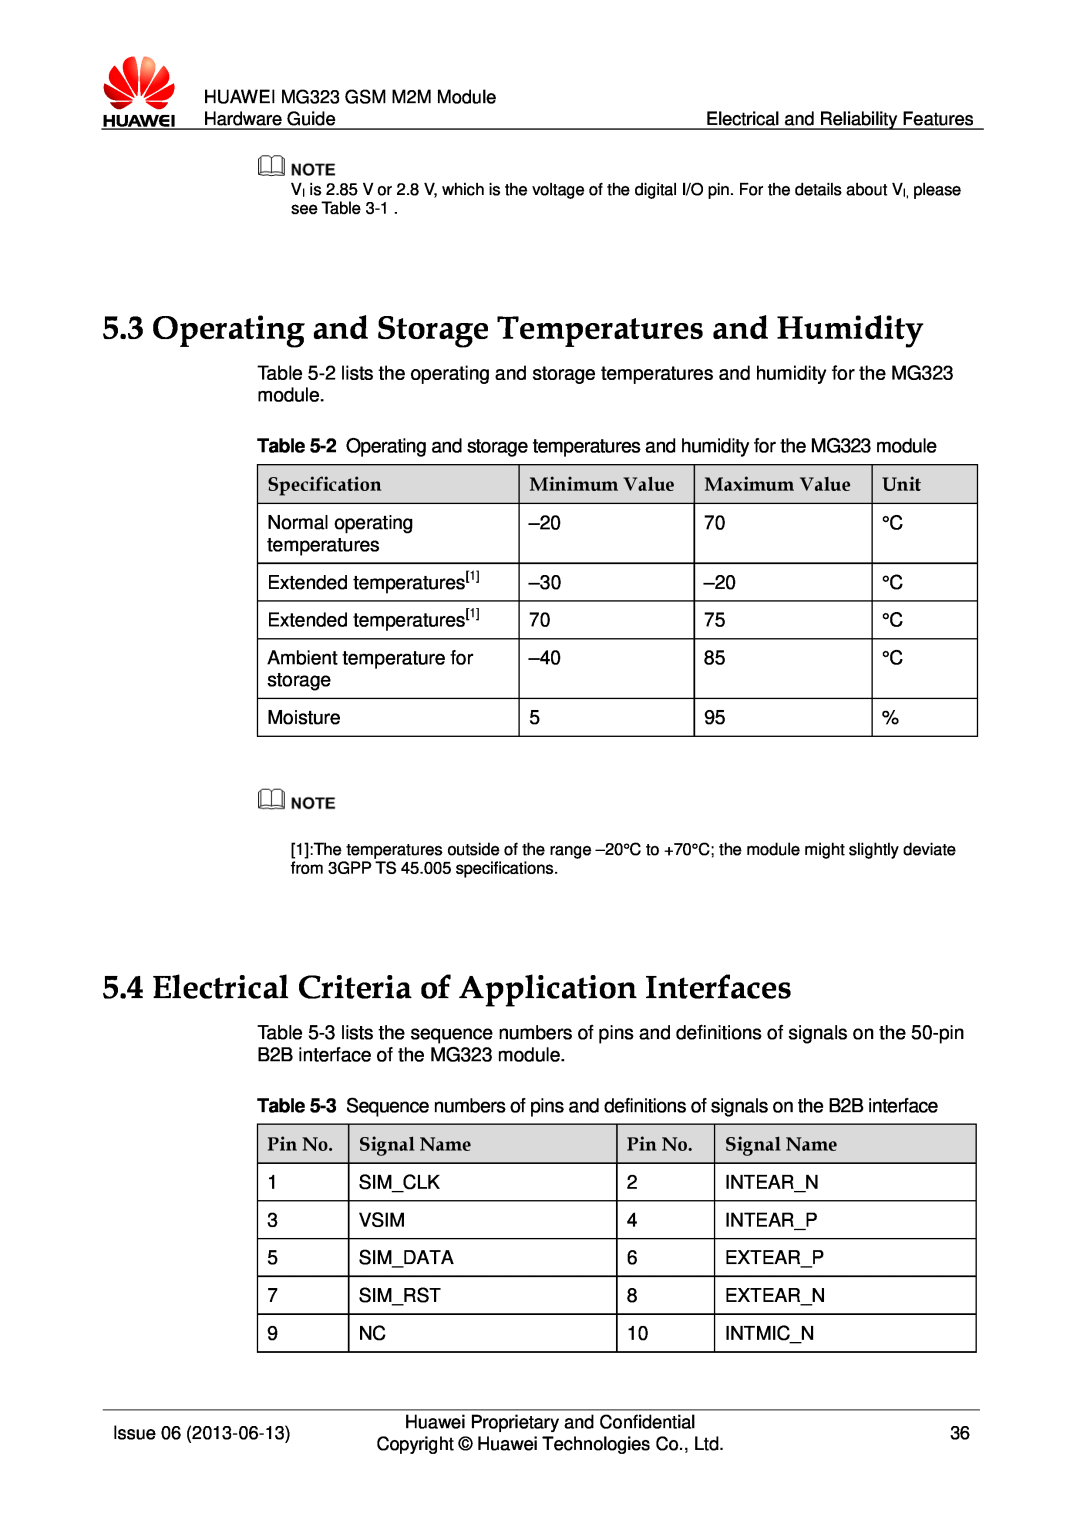 Huawei MG323 Operating and Storage Temperatures and Humidity, Electrical Criteria of Application Interfaces, Specification 